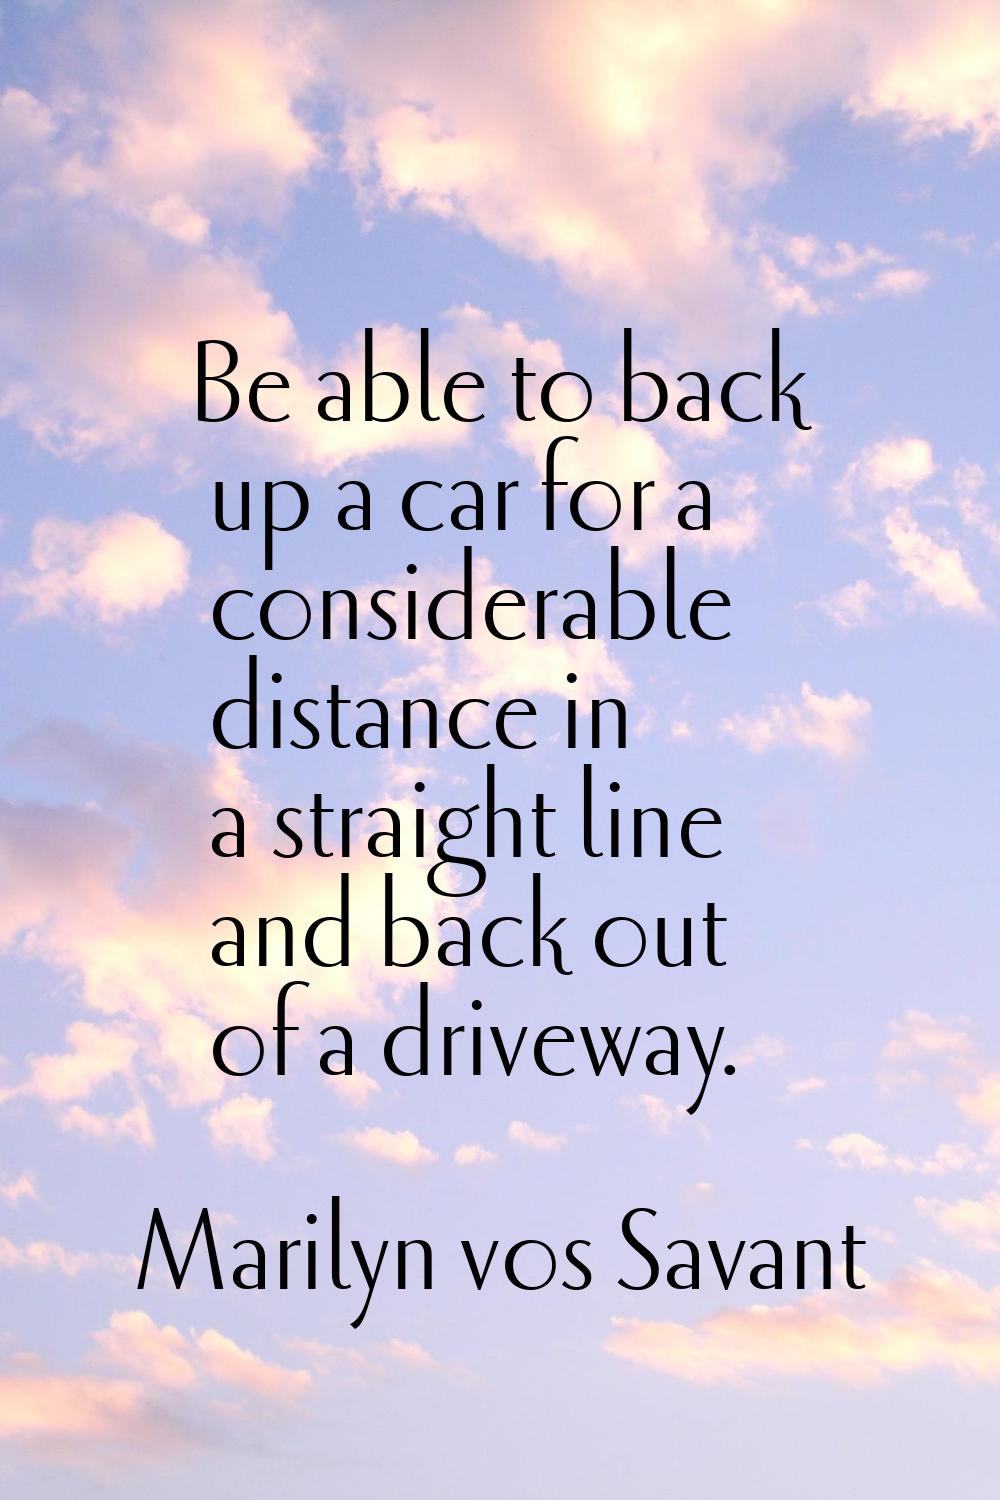 Be able to back up a car for a considerable distance in a straight line and back out of a driveway.